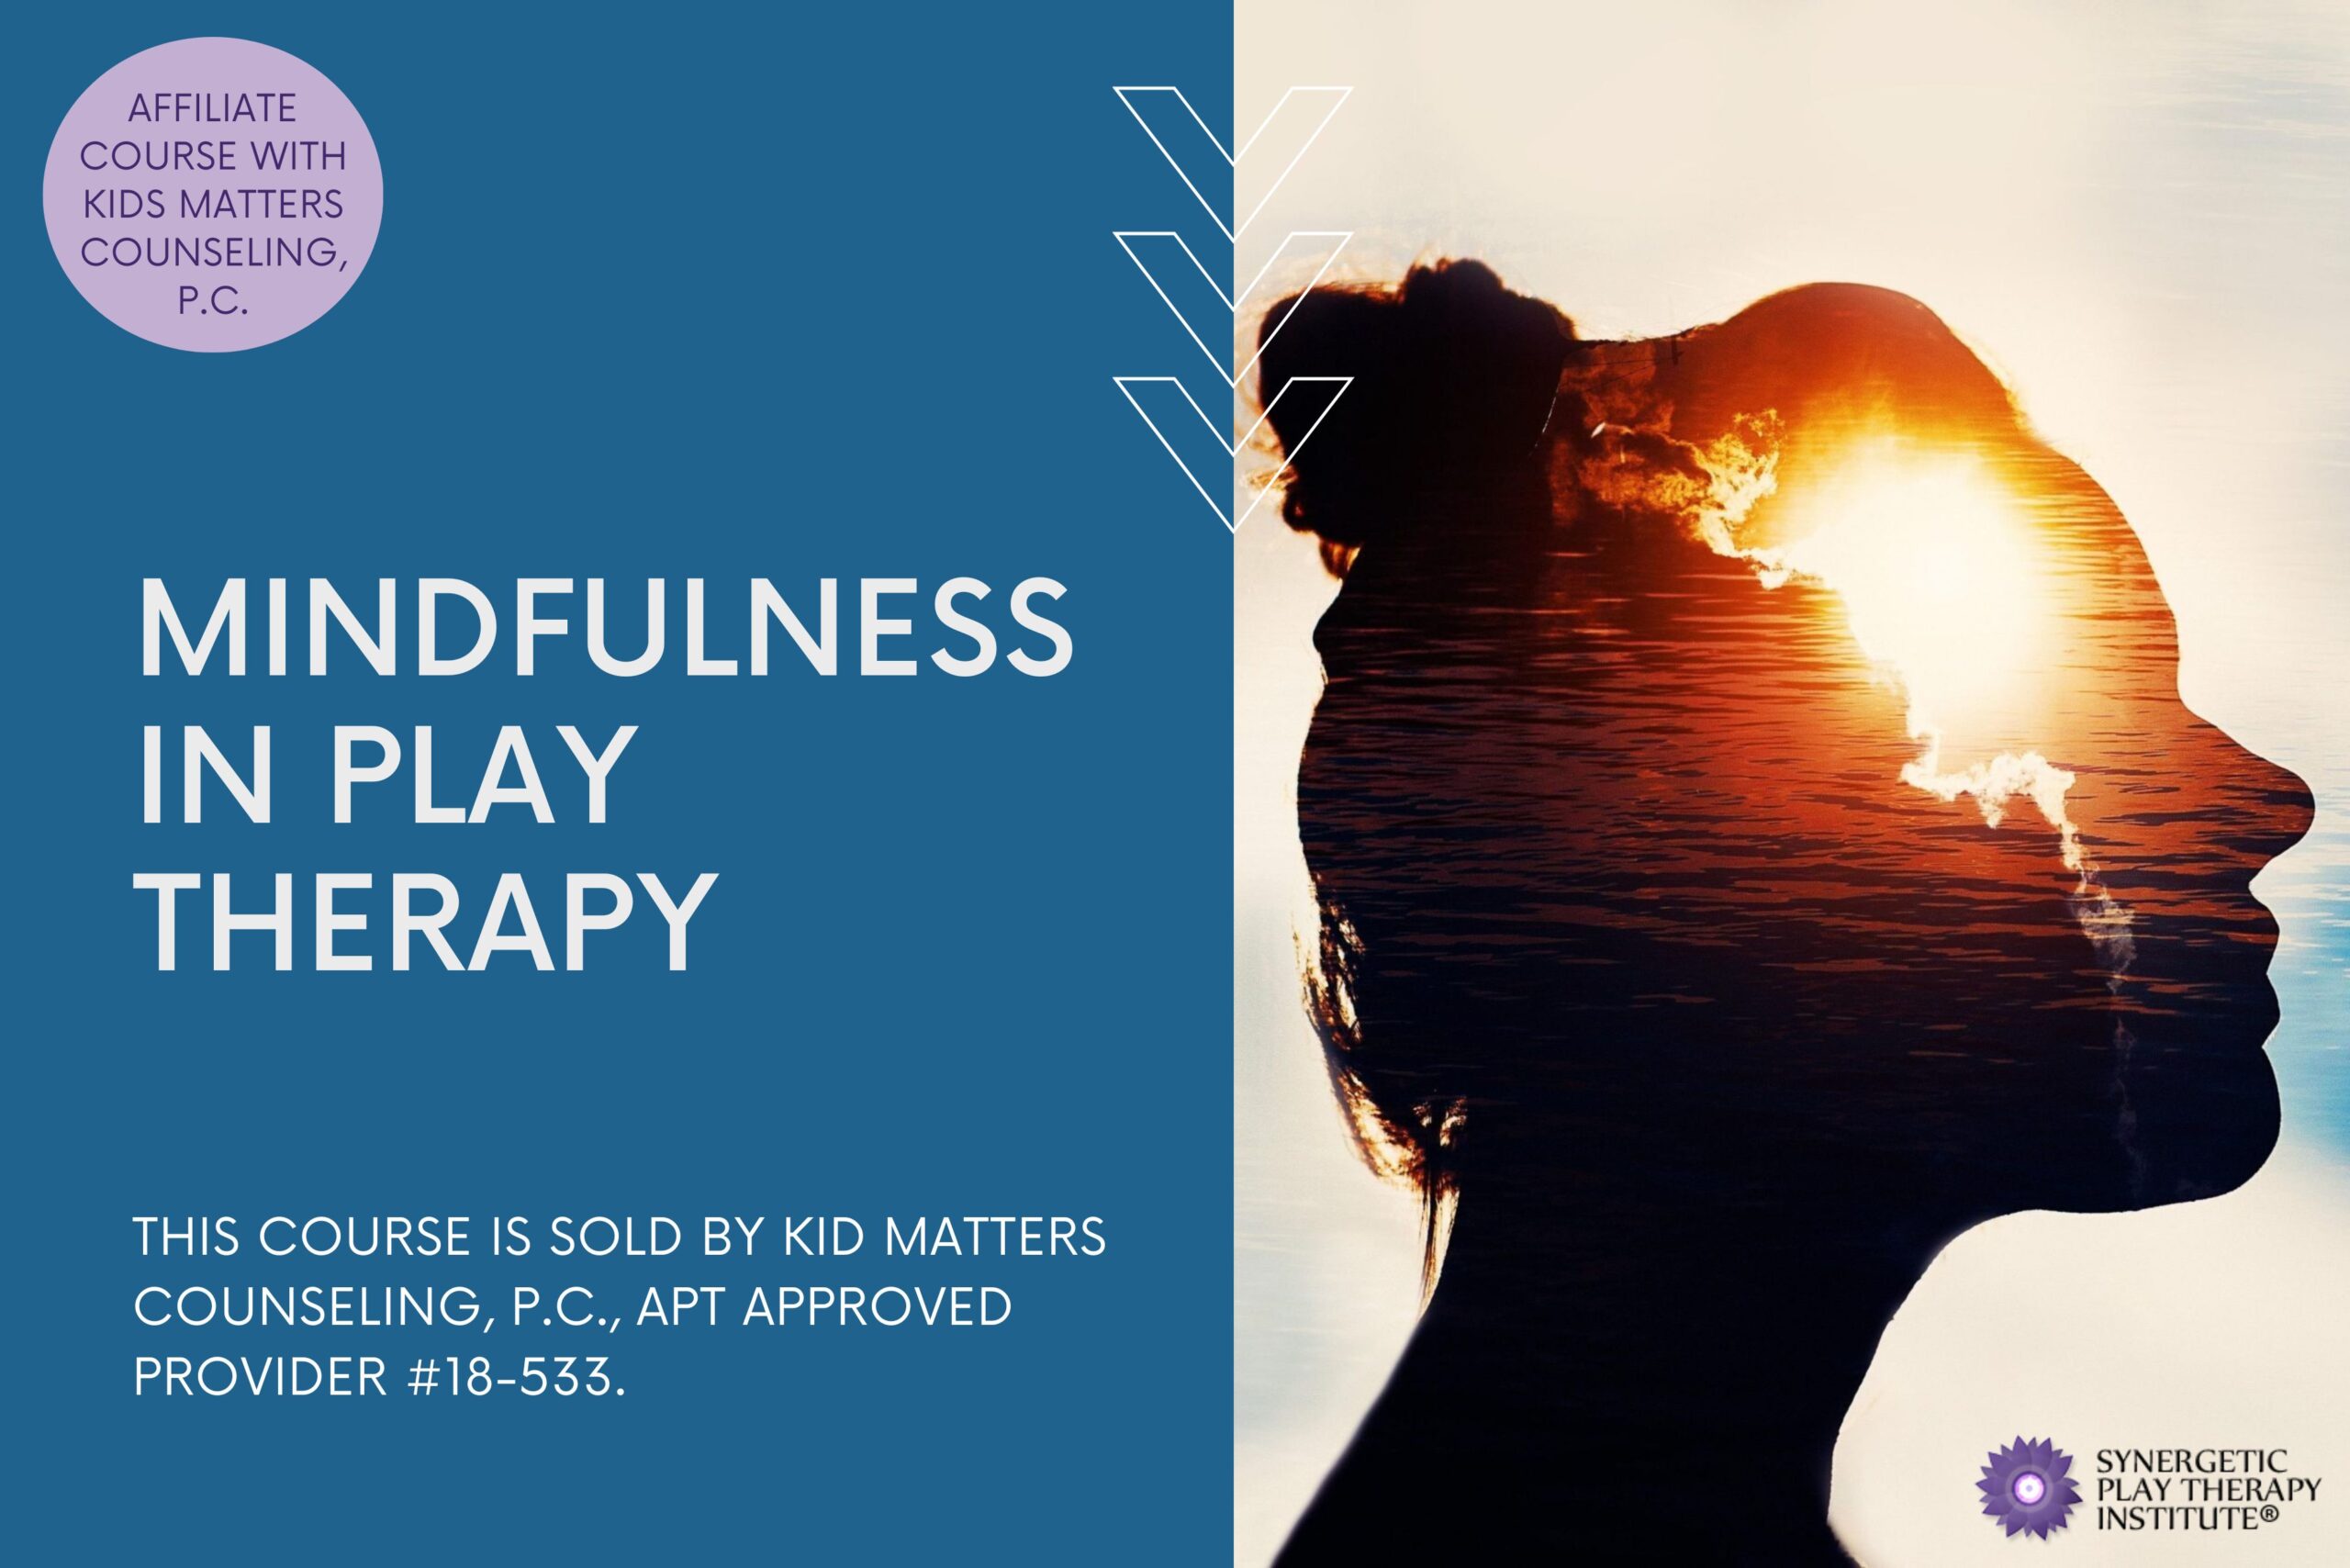 What Is Mindfulness Therapy?